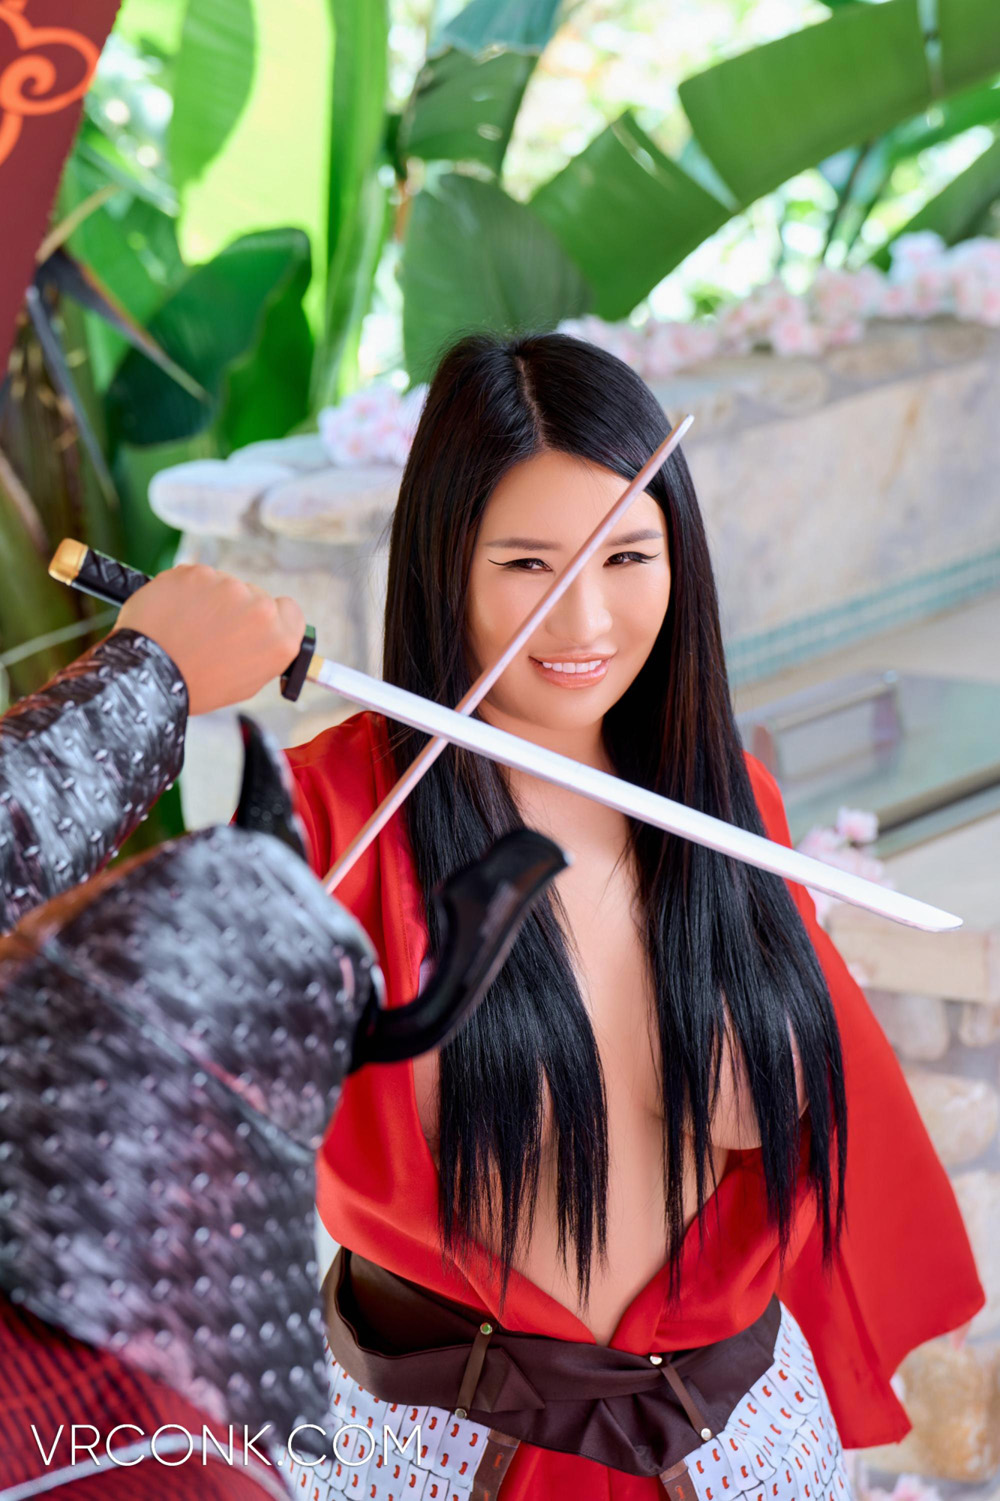 Suki Sin dresses up as an ancient Chinese hero to enhances her fucking skills